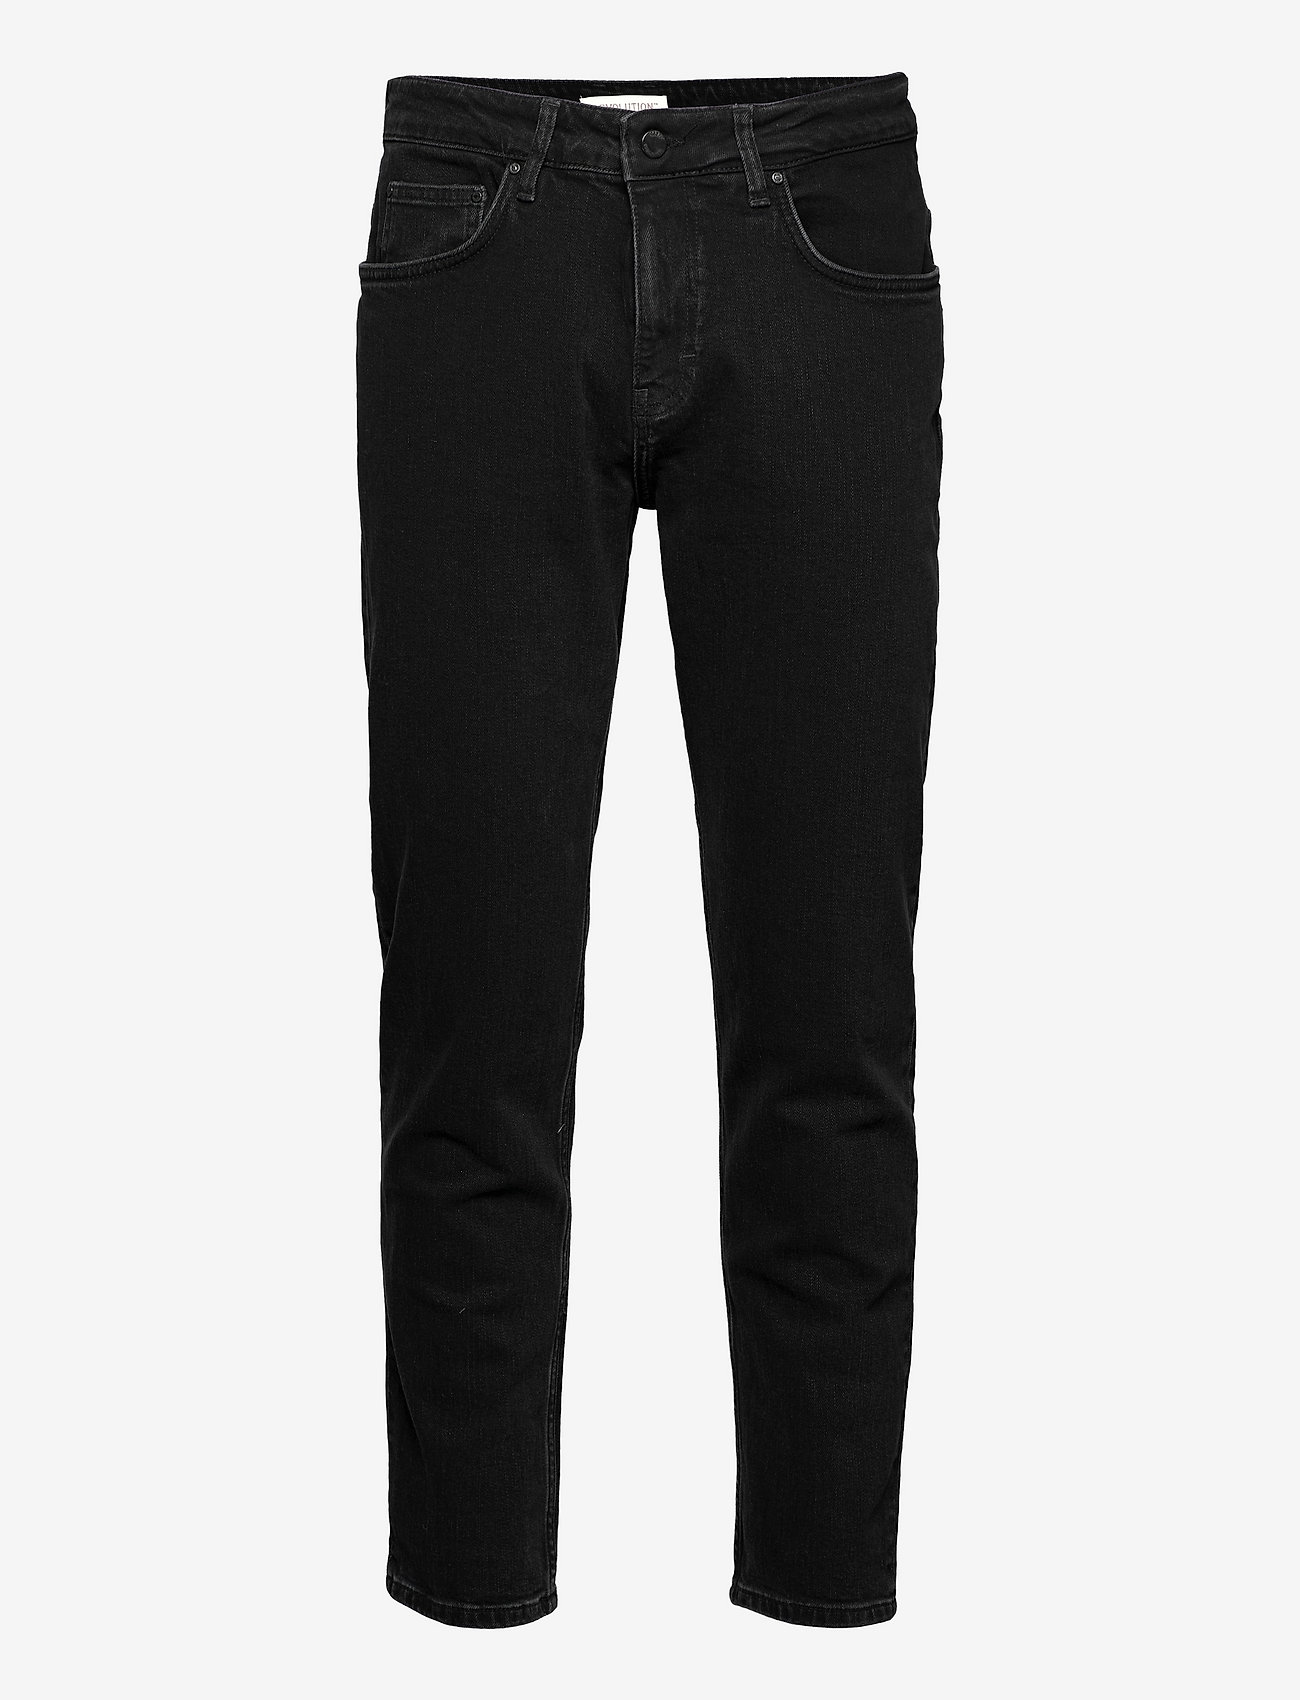 Revolution - Rinsed black loose jeans - relaxed jeans - black - 0